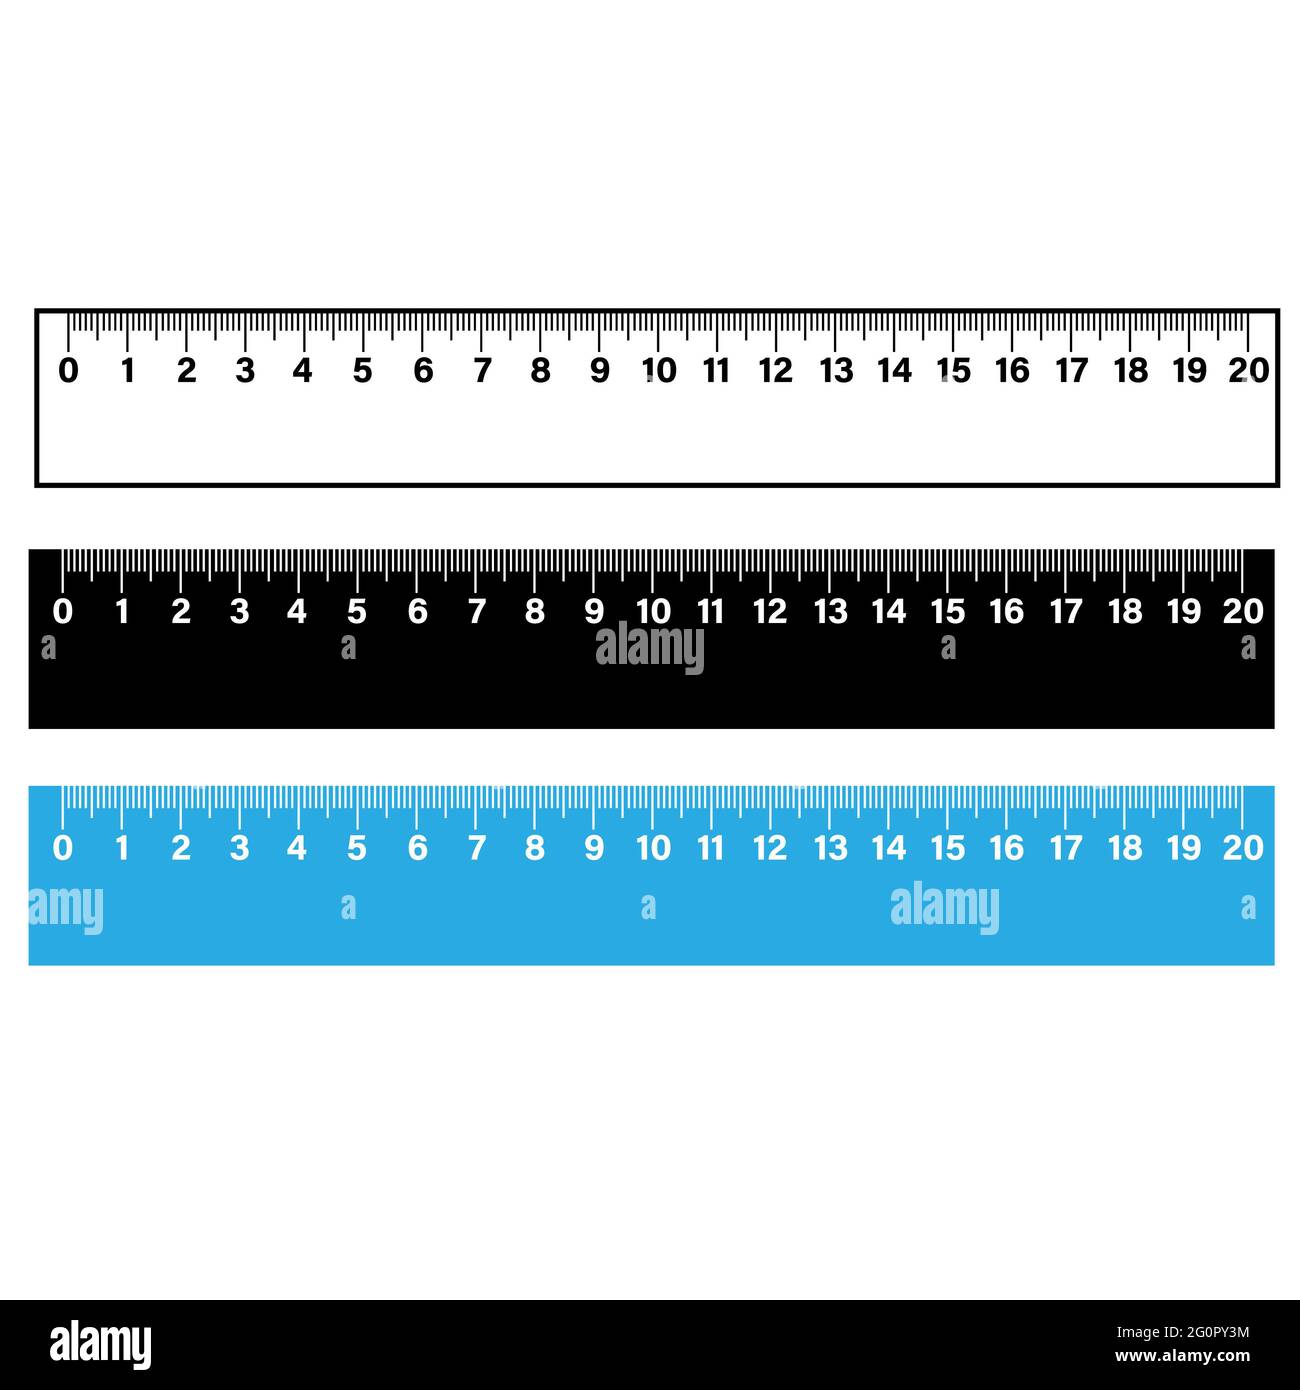 ruler scale measure on white background. wooden measuring ruler 20 centimeters. school math tool. flat style. Stock Photo